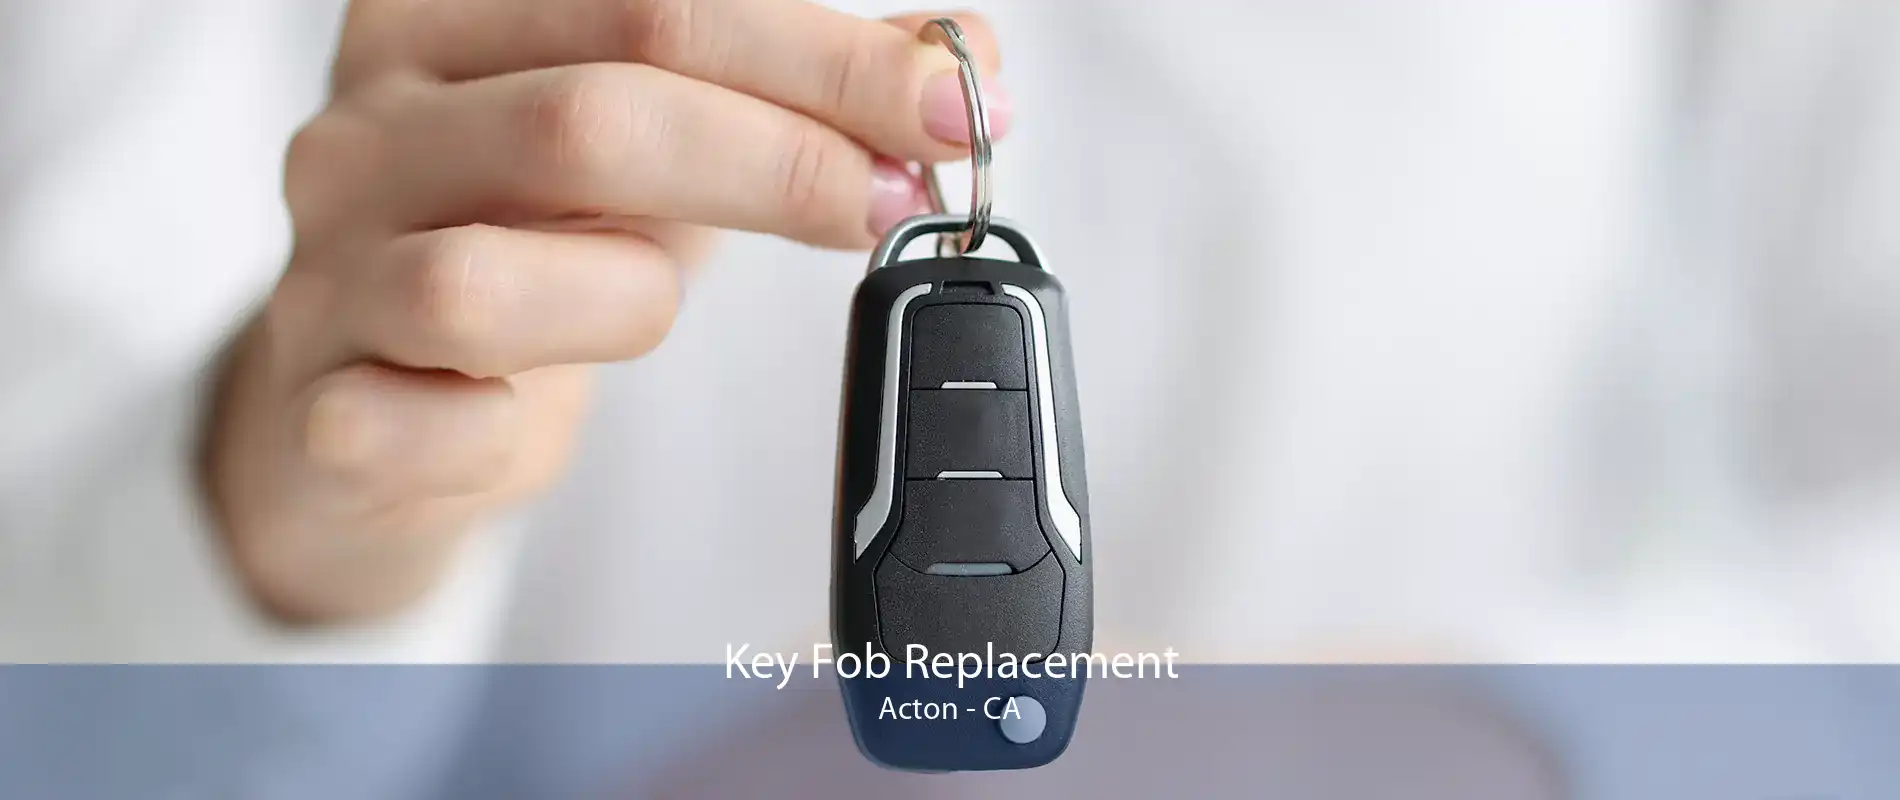 Key Fob Replacement Acton - CA